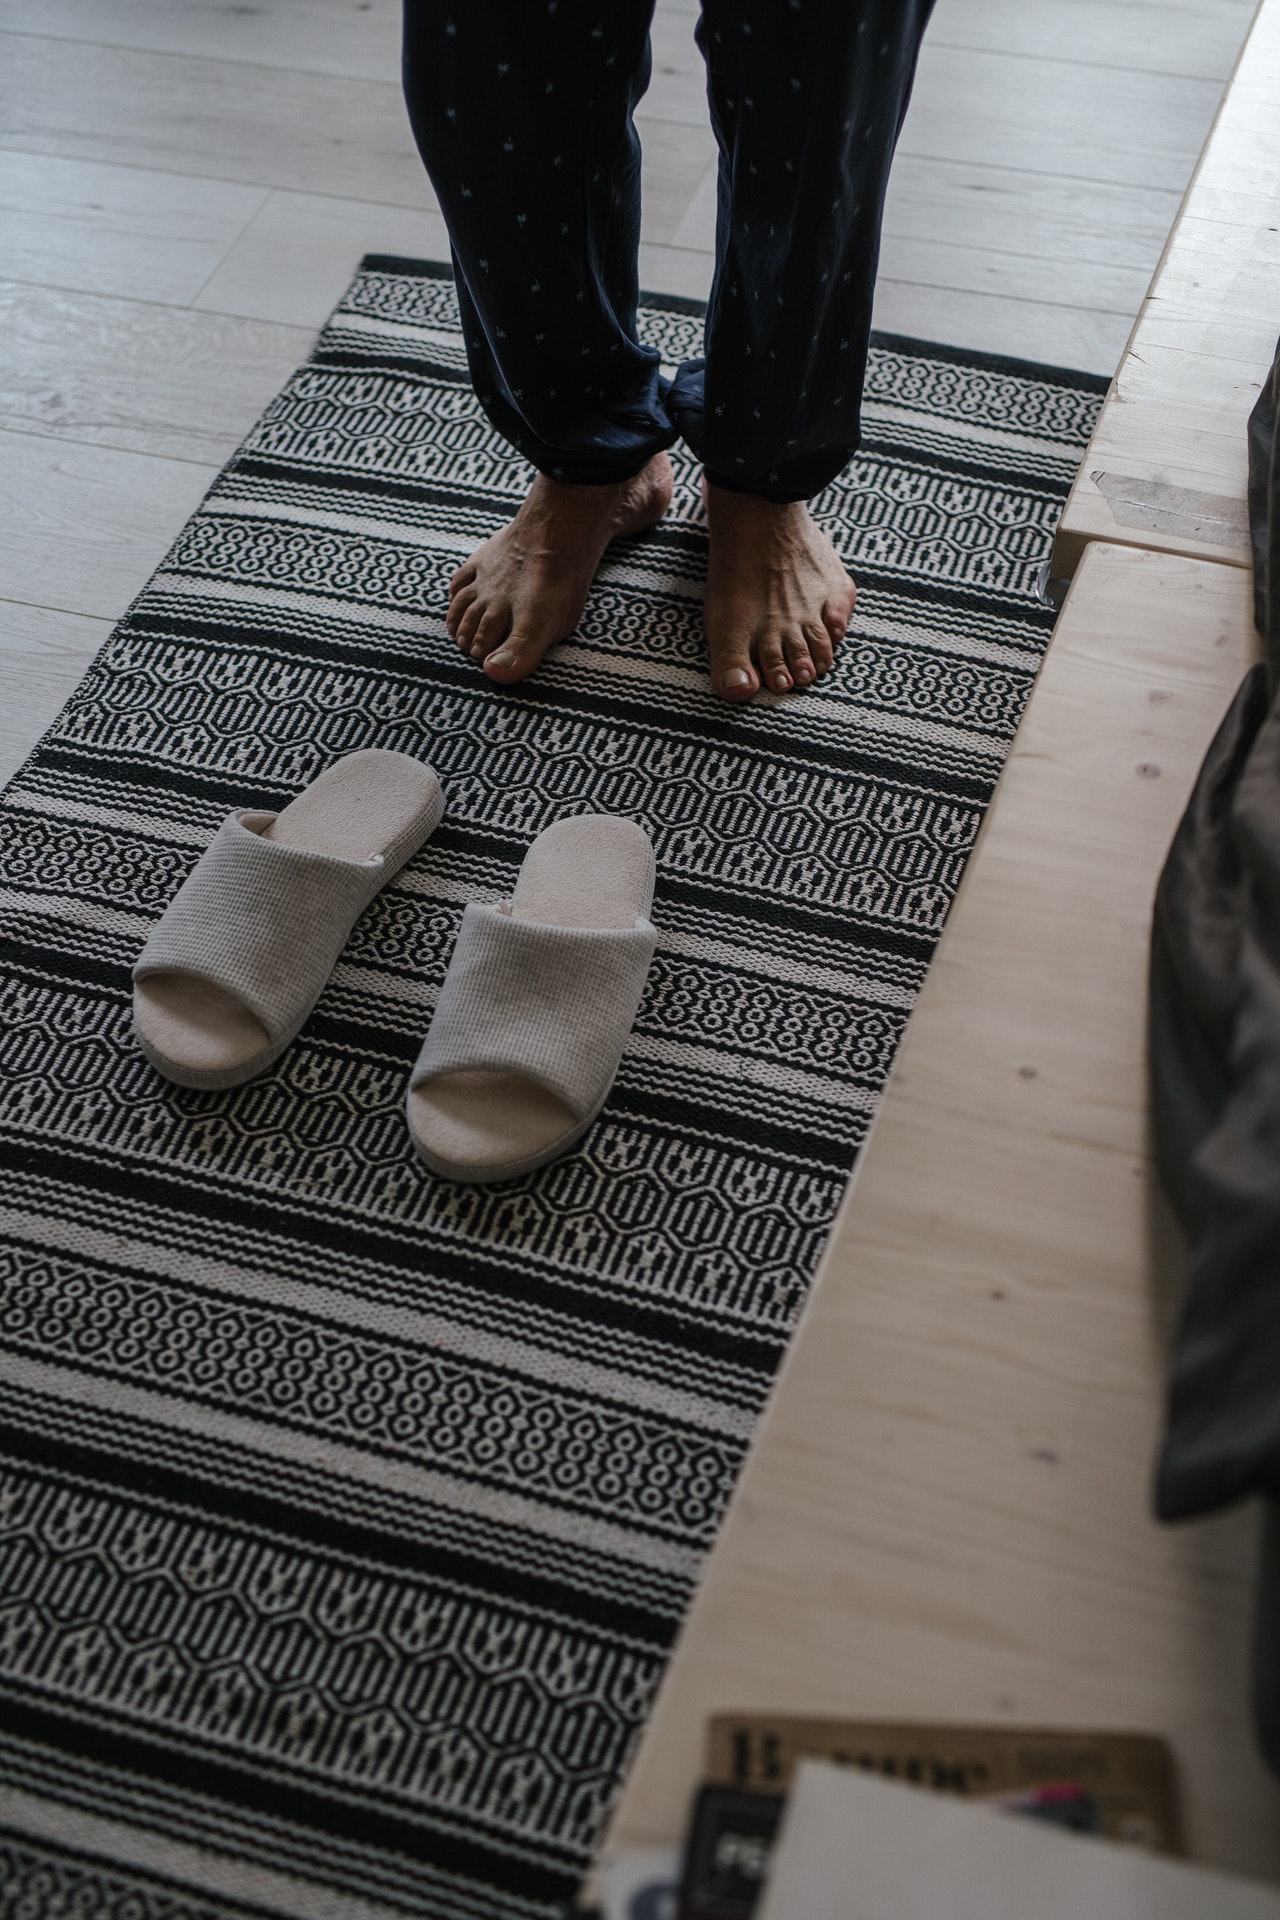 A person standing on a rug